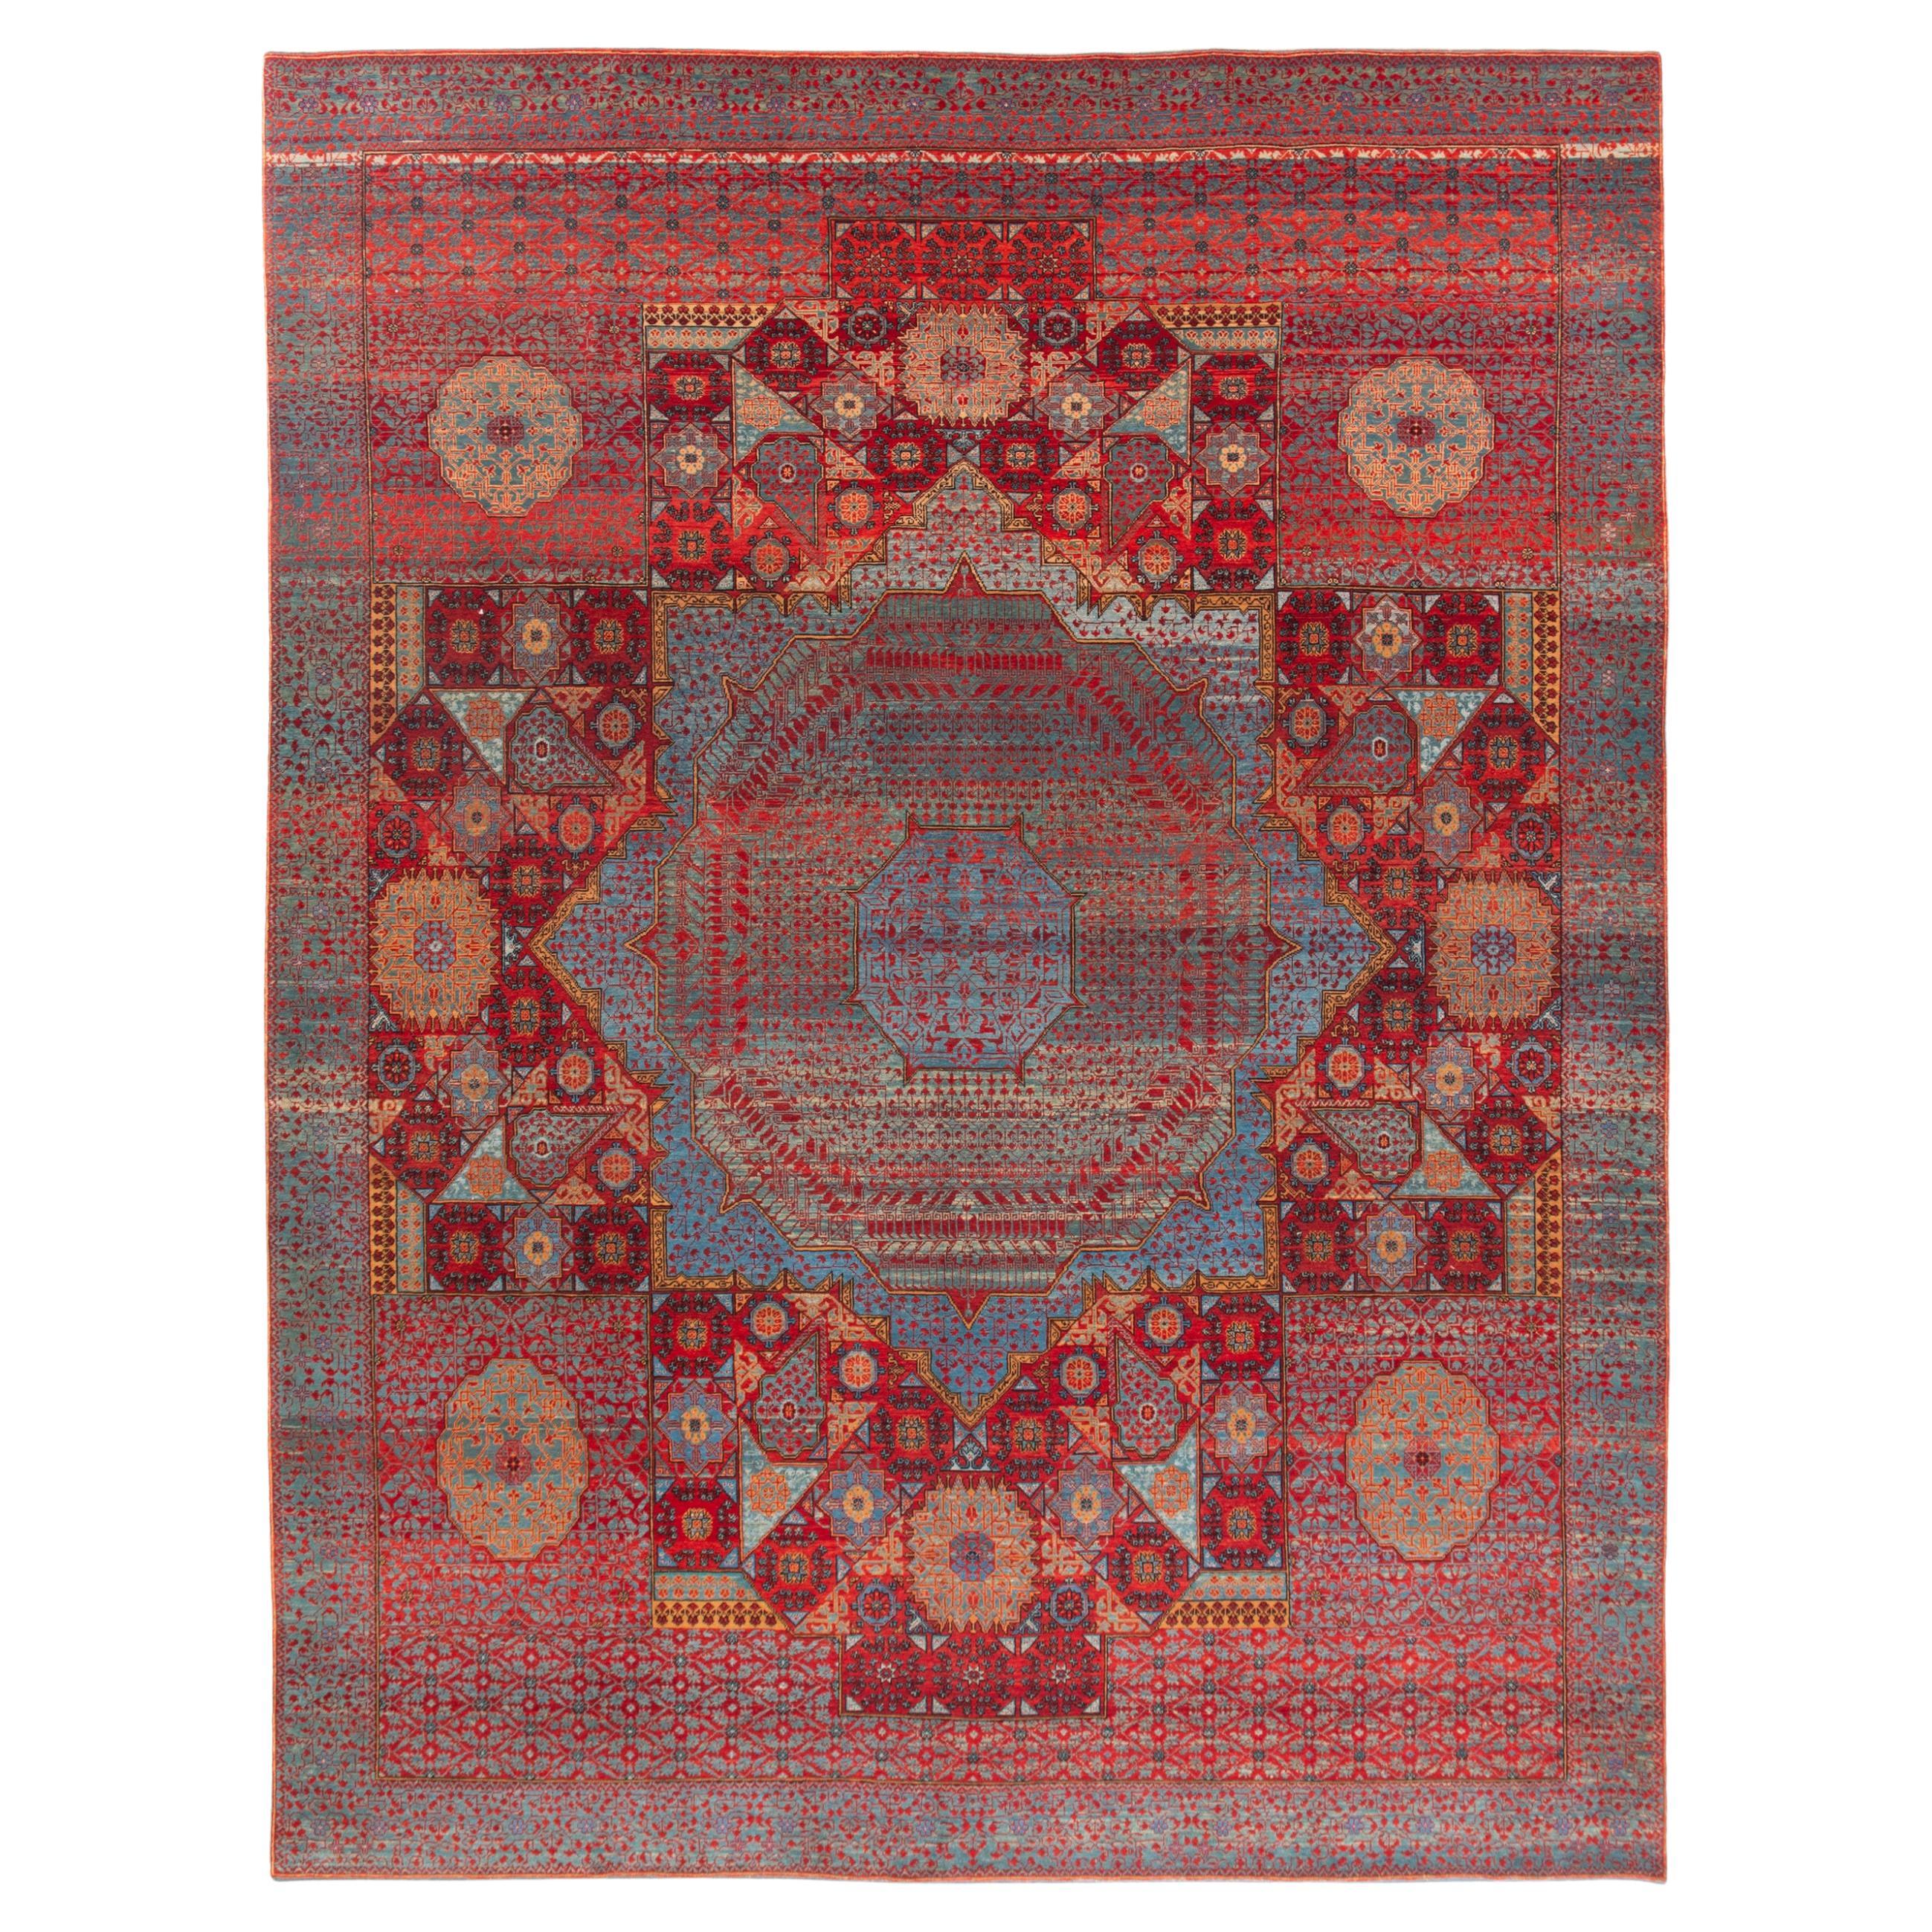 Ararat Rugs Mamluk Carpet with Central Star 16th Century Revival, Natural Dyed